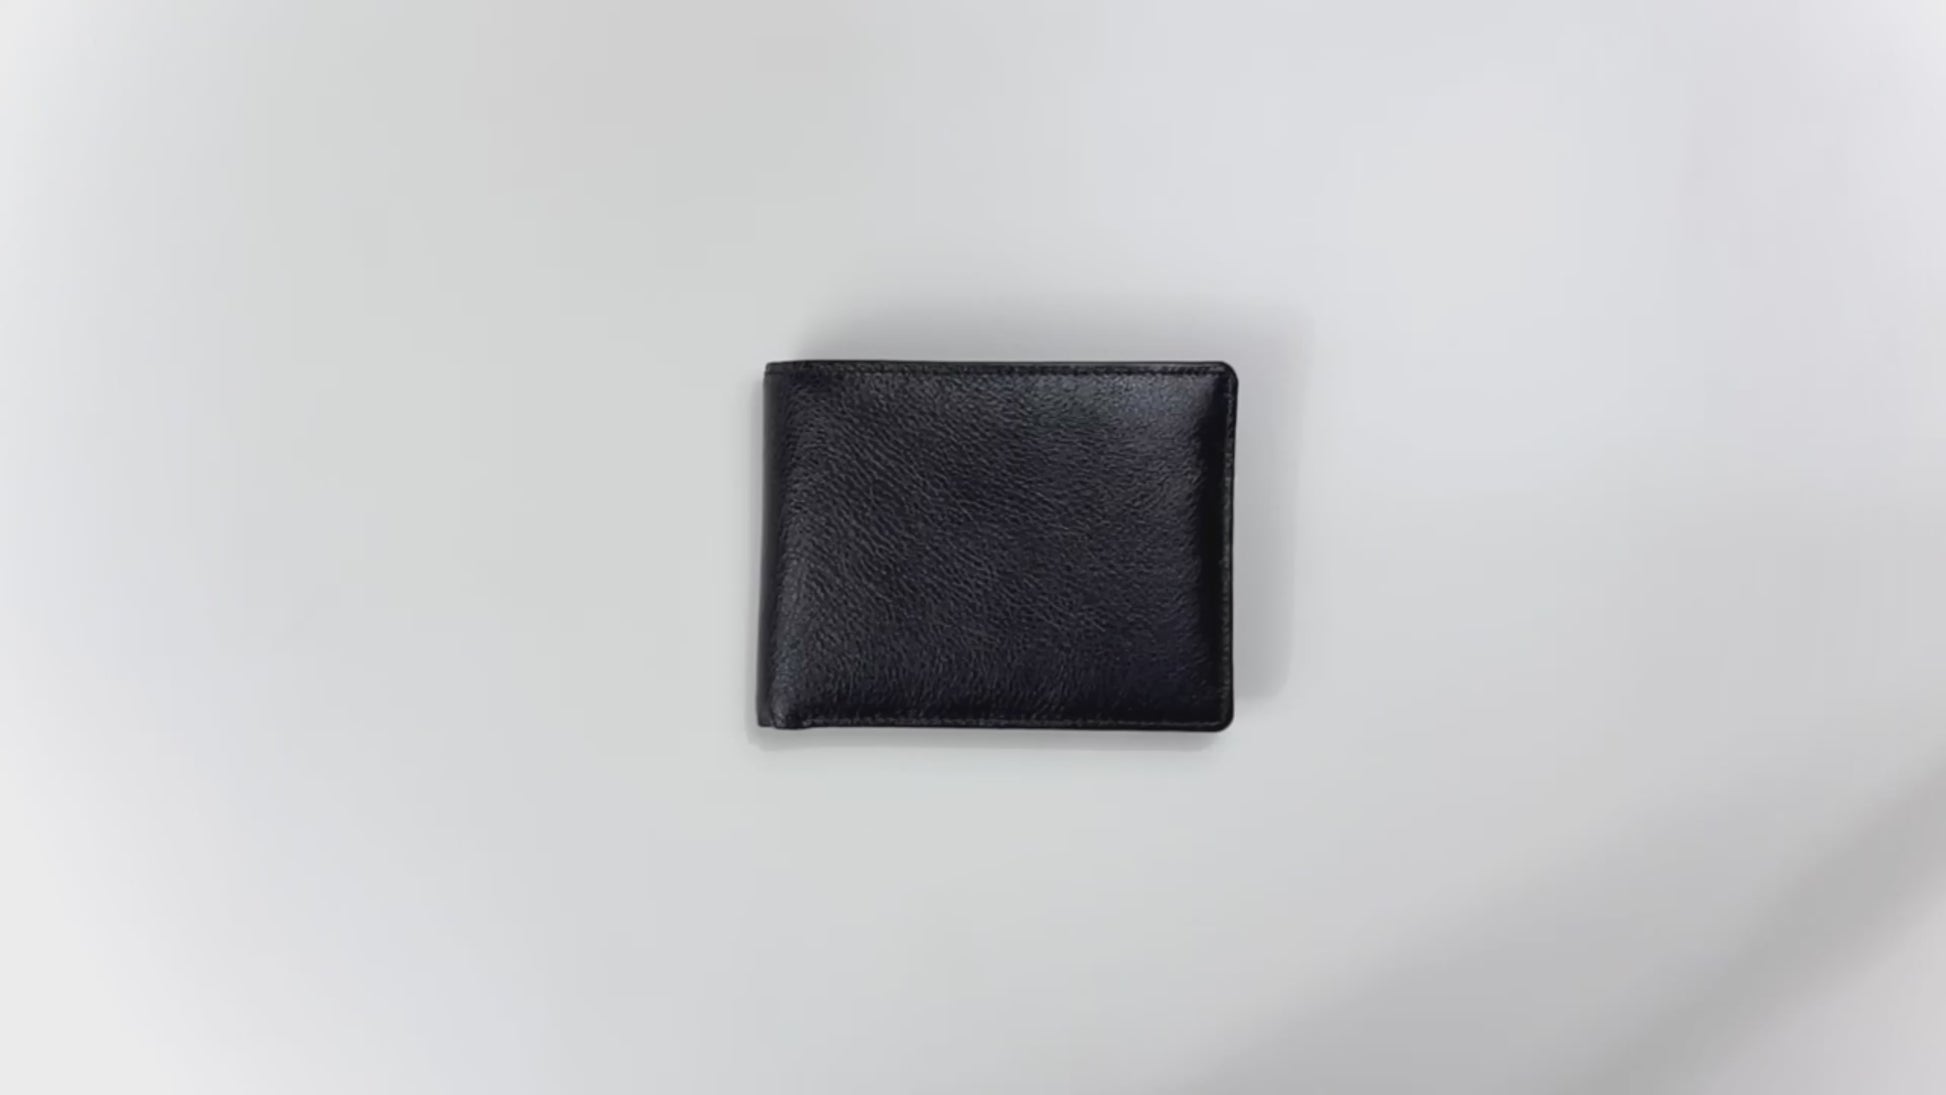 2 in 1 Bifold Wallet with Detachable MagSafe Wallet - Full-grain